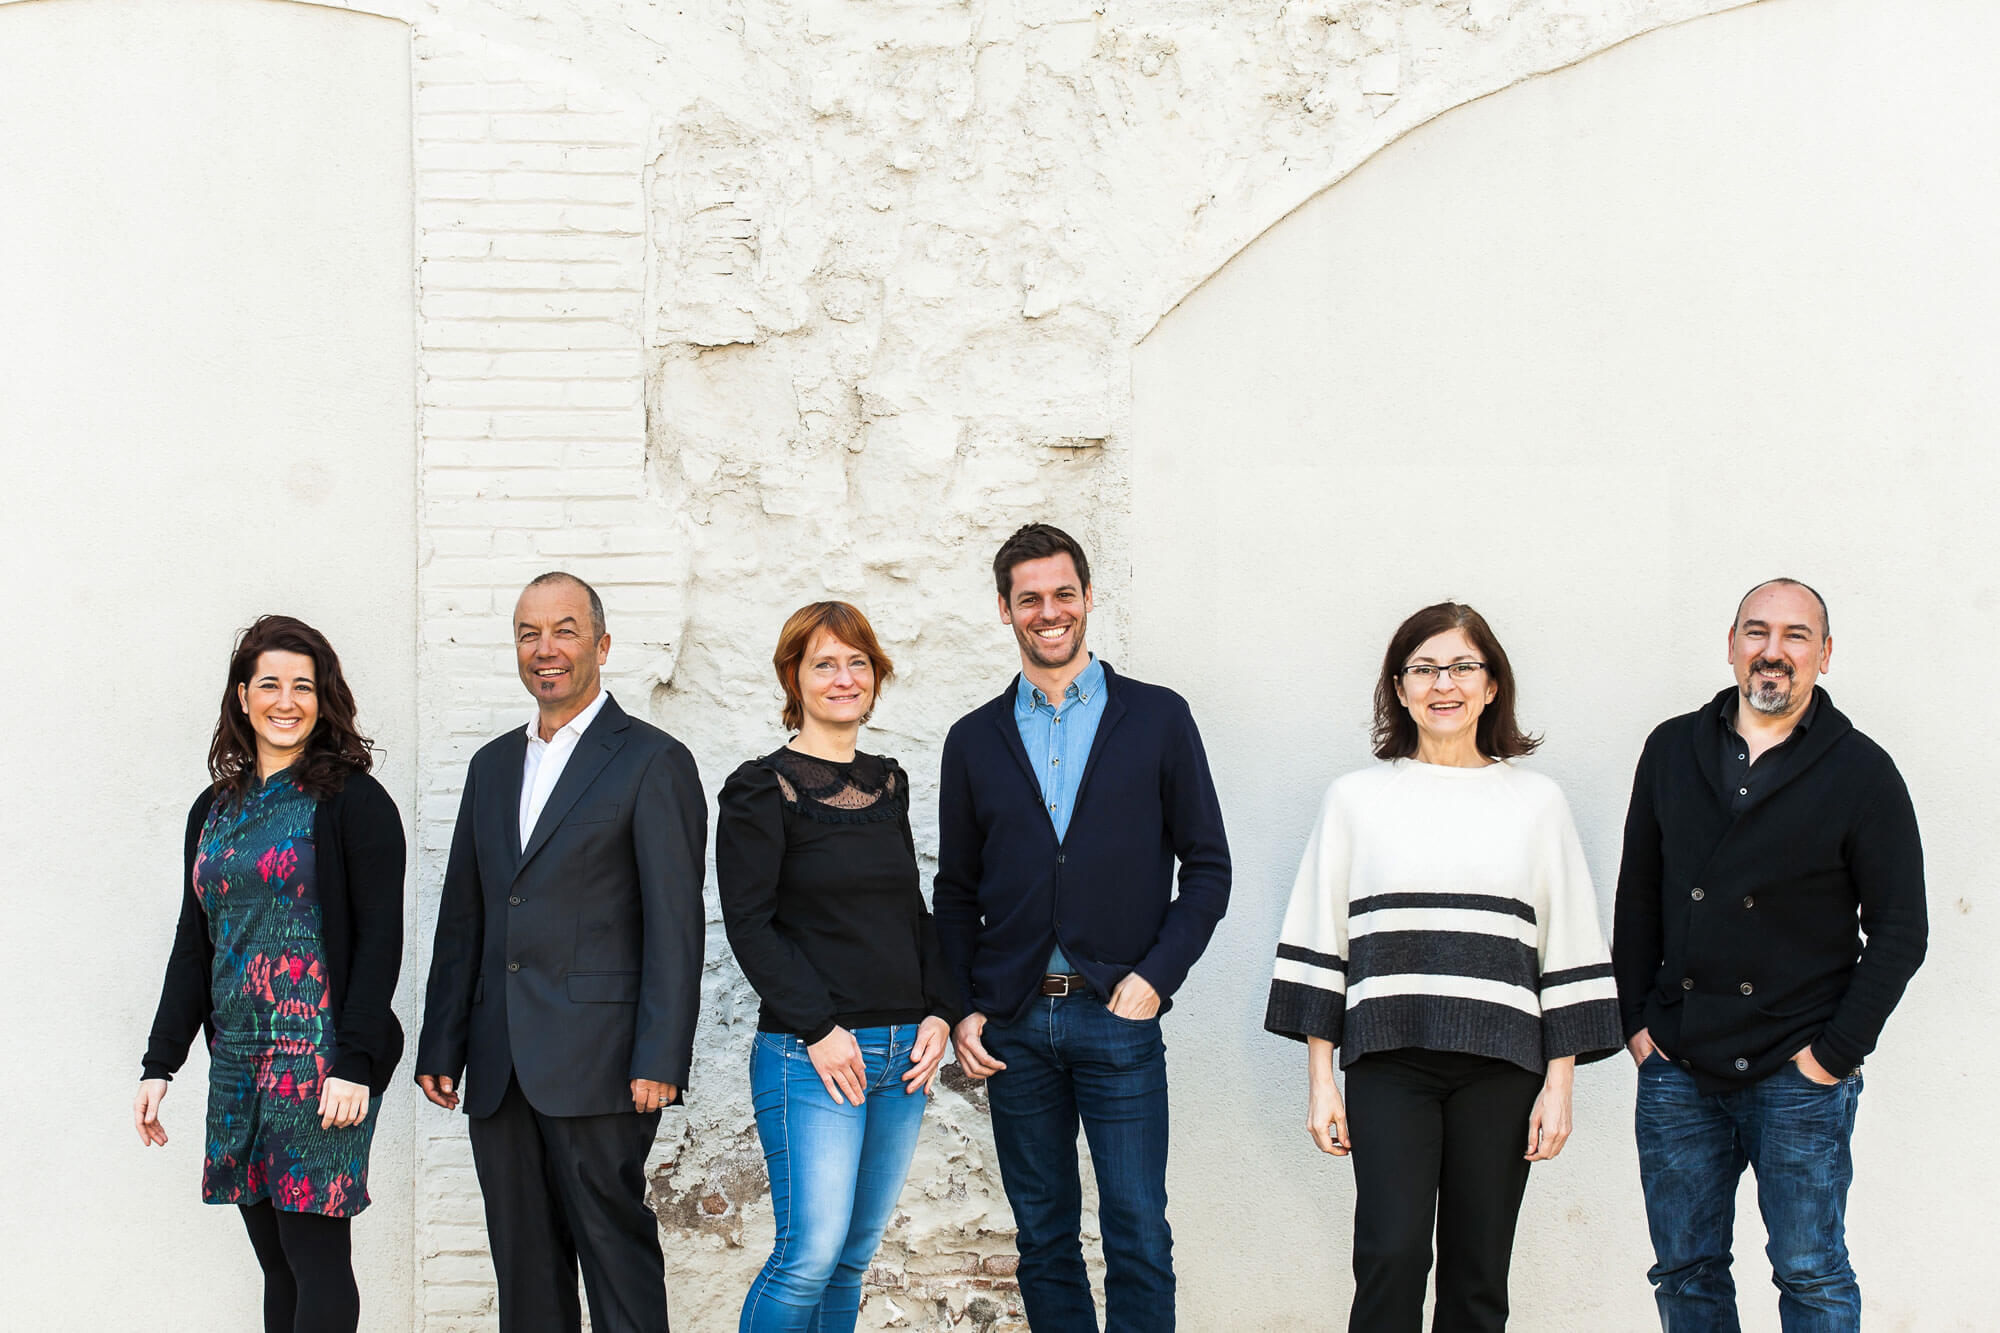 Expert team for architectural tours in Barcelona, posing in front of white building facade